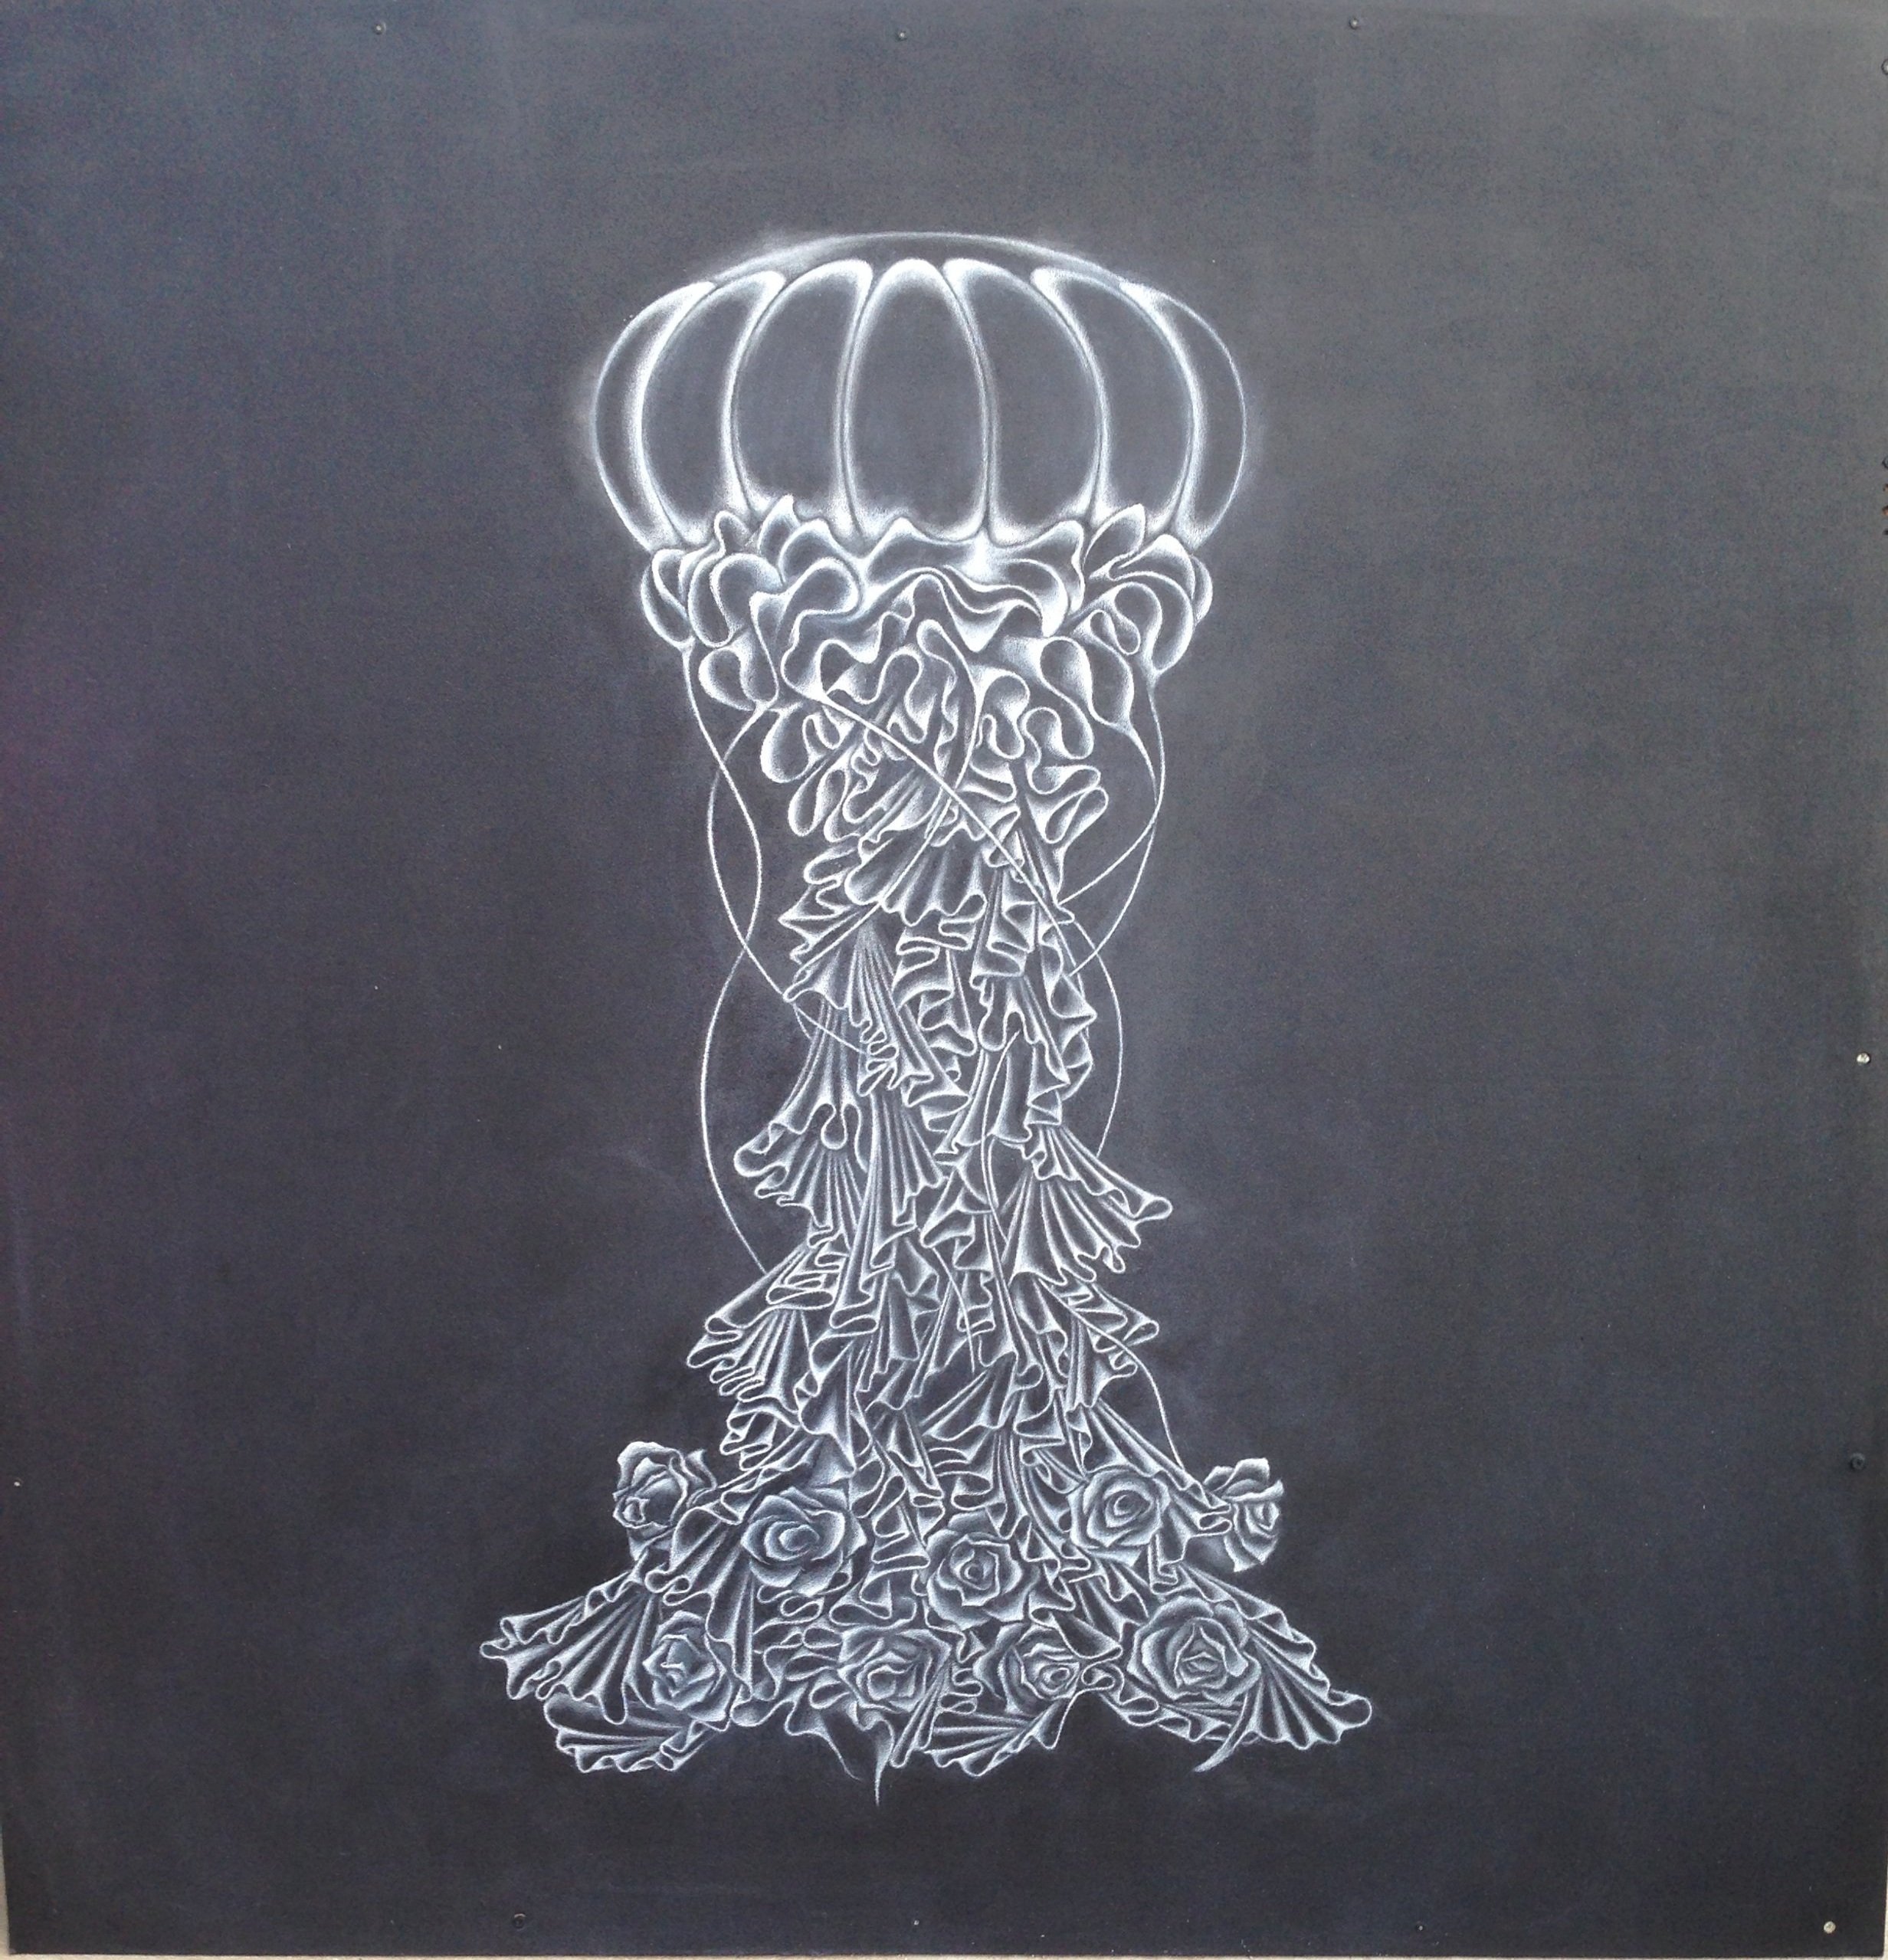 Untitled, 48 x 48, acrylic and graphite on board